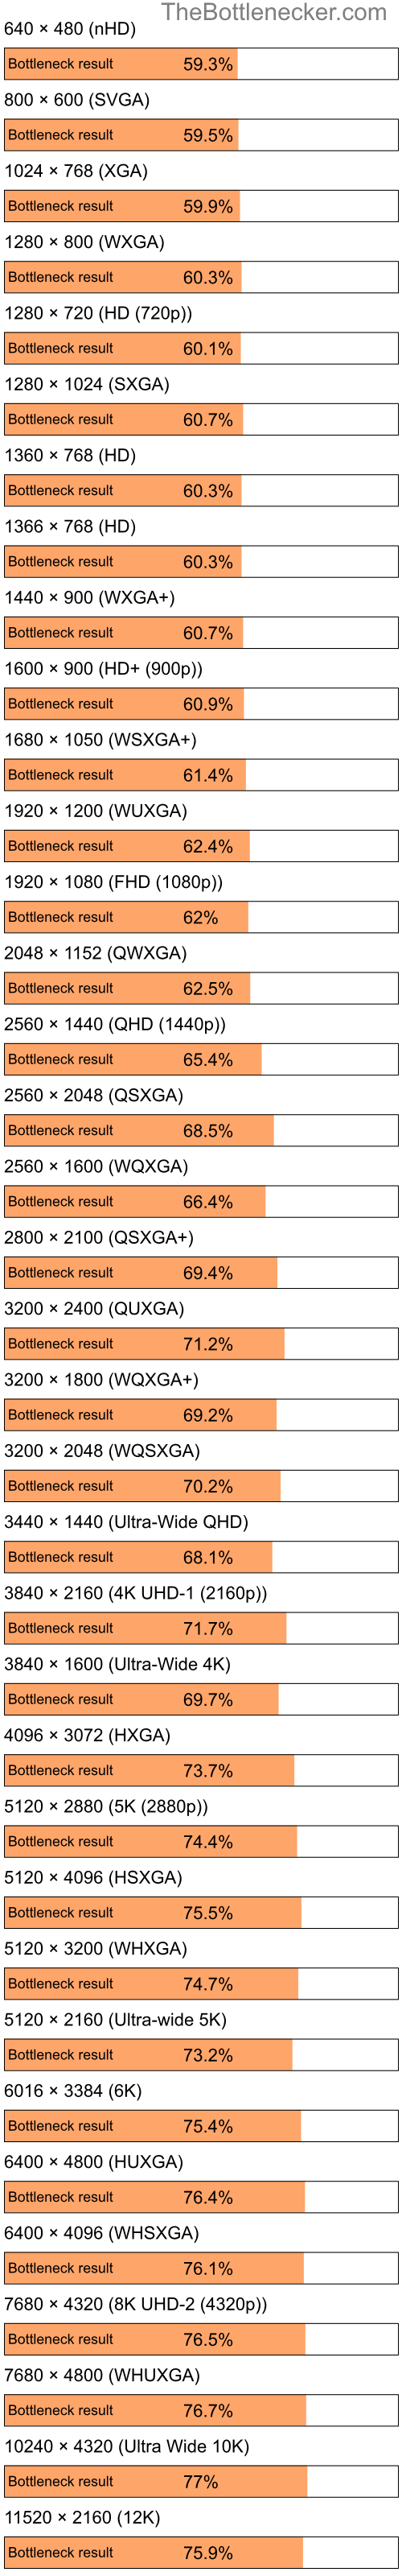 Bottleneck results by resolution for Intel Atom N280 and AMD Radeon X800GT in Processor Intense Tasks